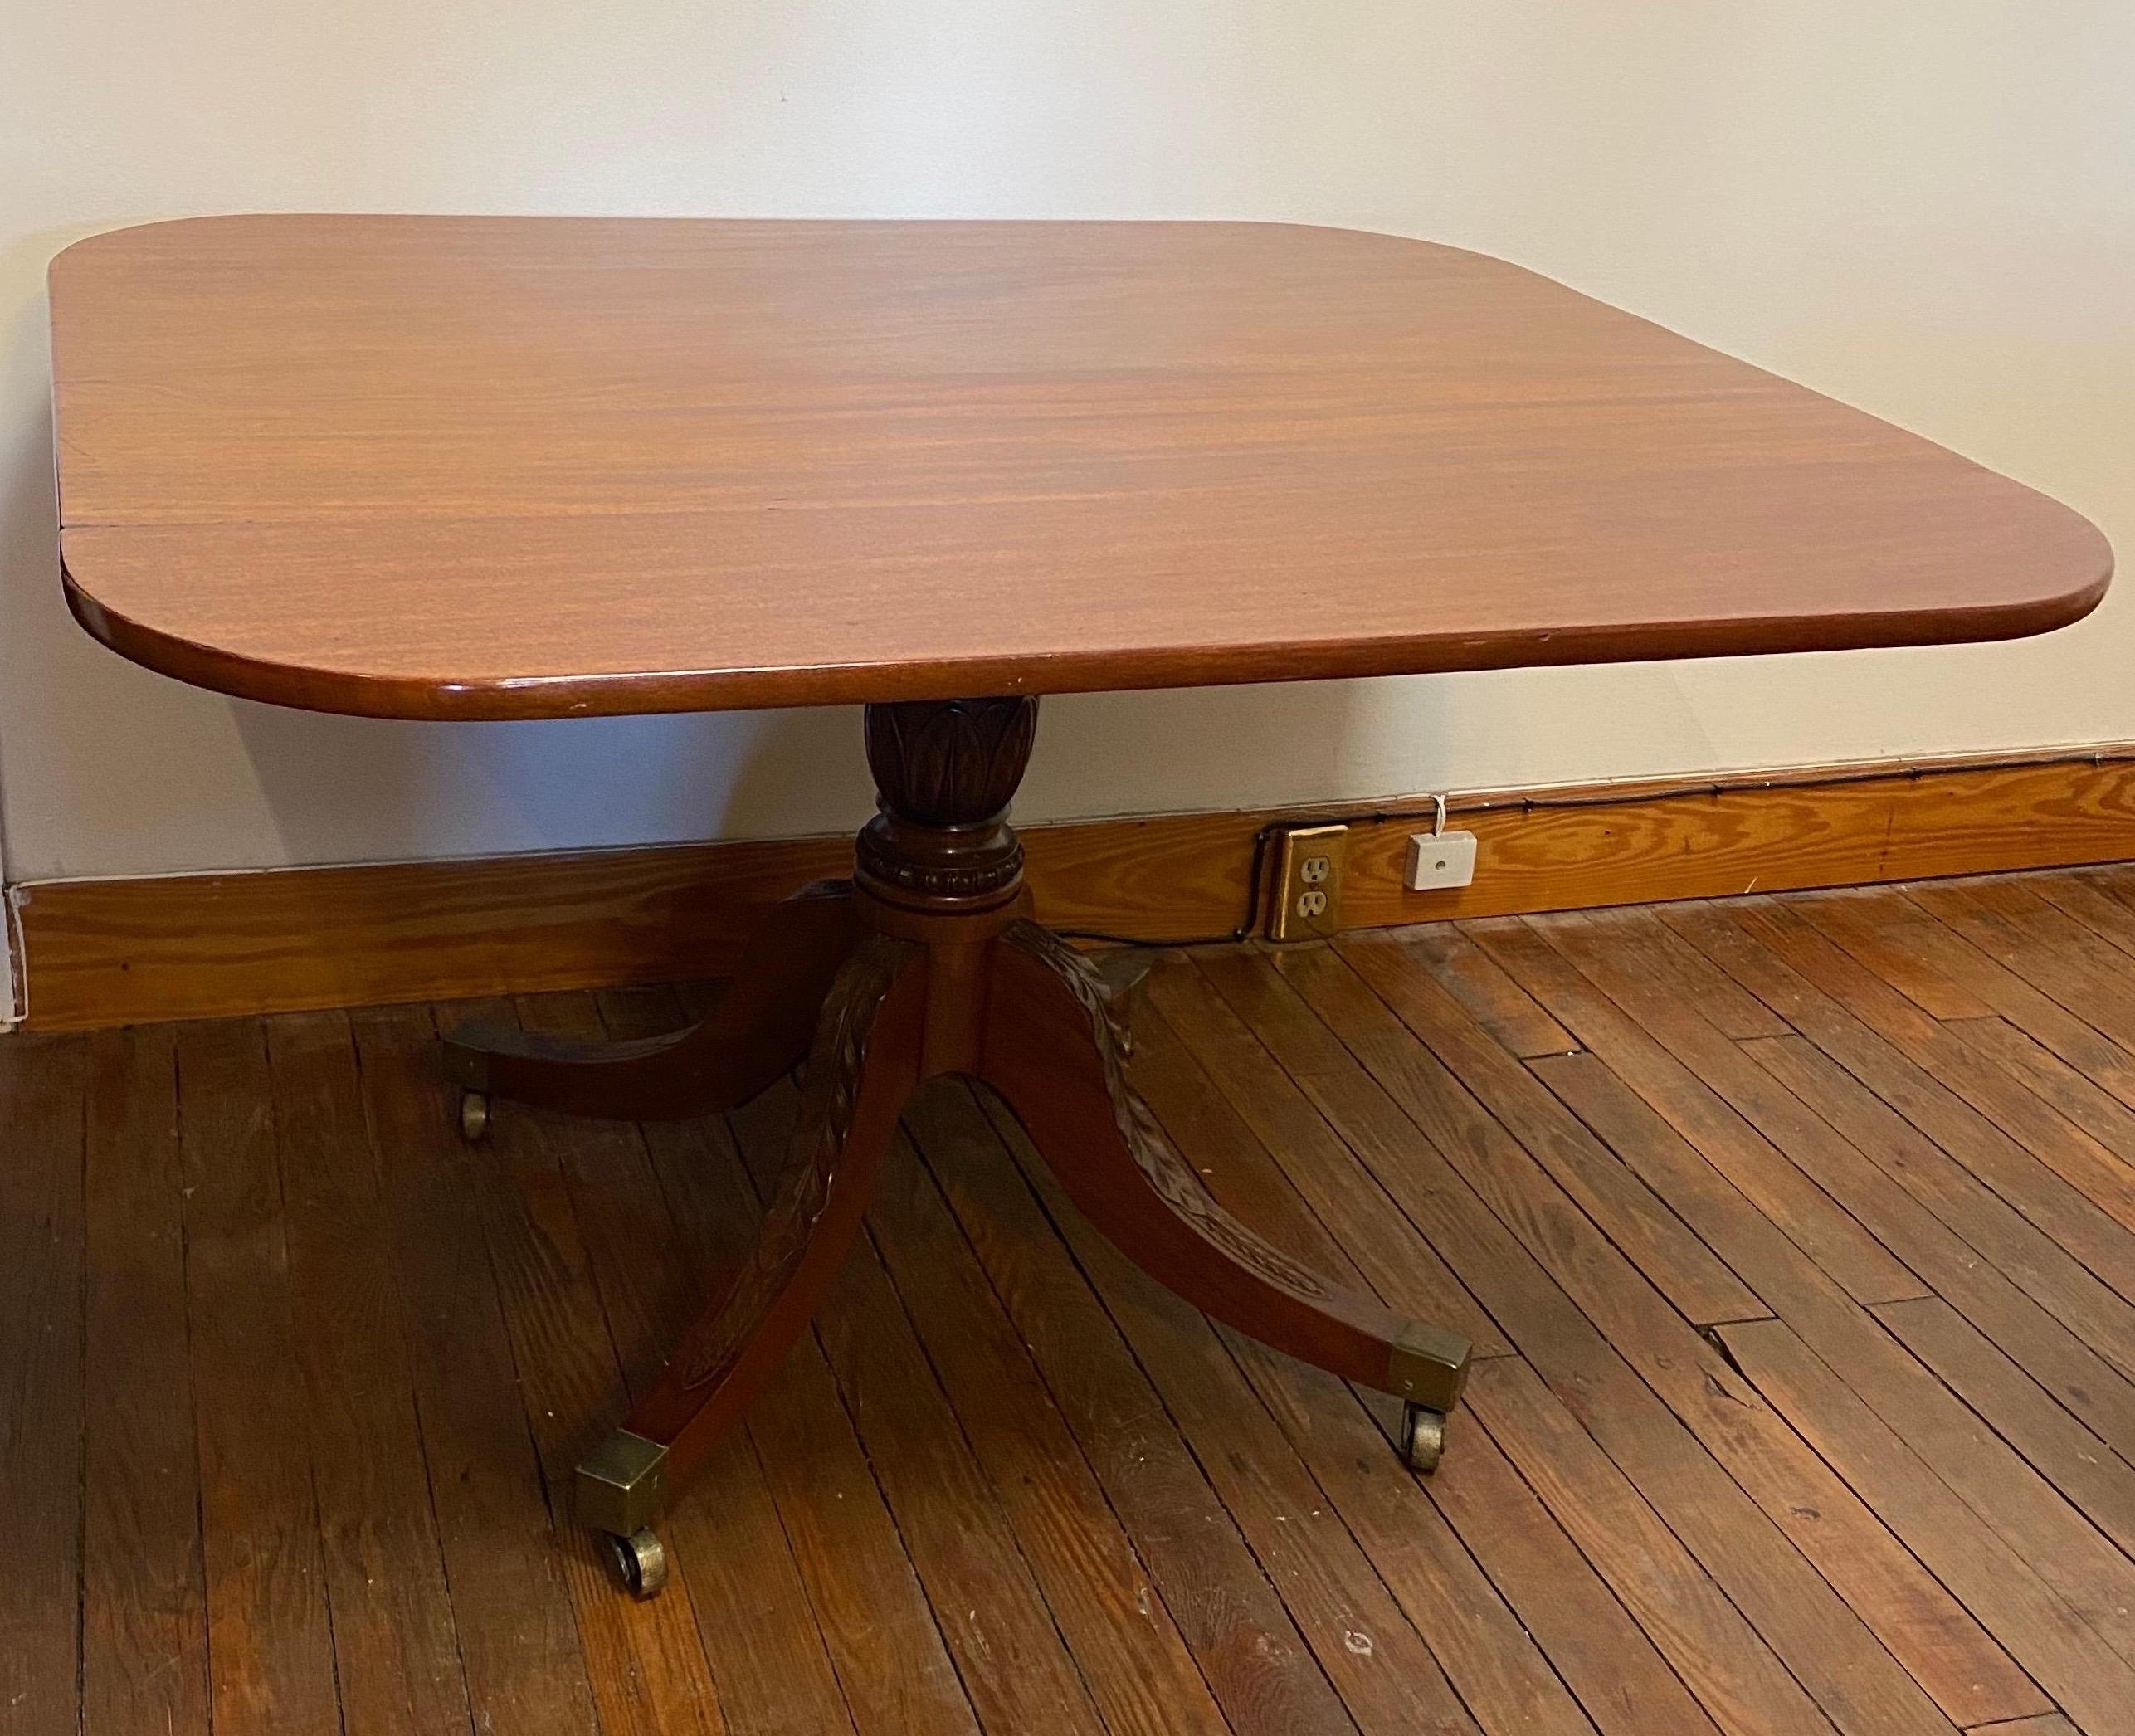 19th century Federal mahogany tilt top breakfast table from Maryland. Wonderfully carved legs and base. Feathered base seen on other pieces from Baltimore and Maryland.